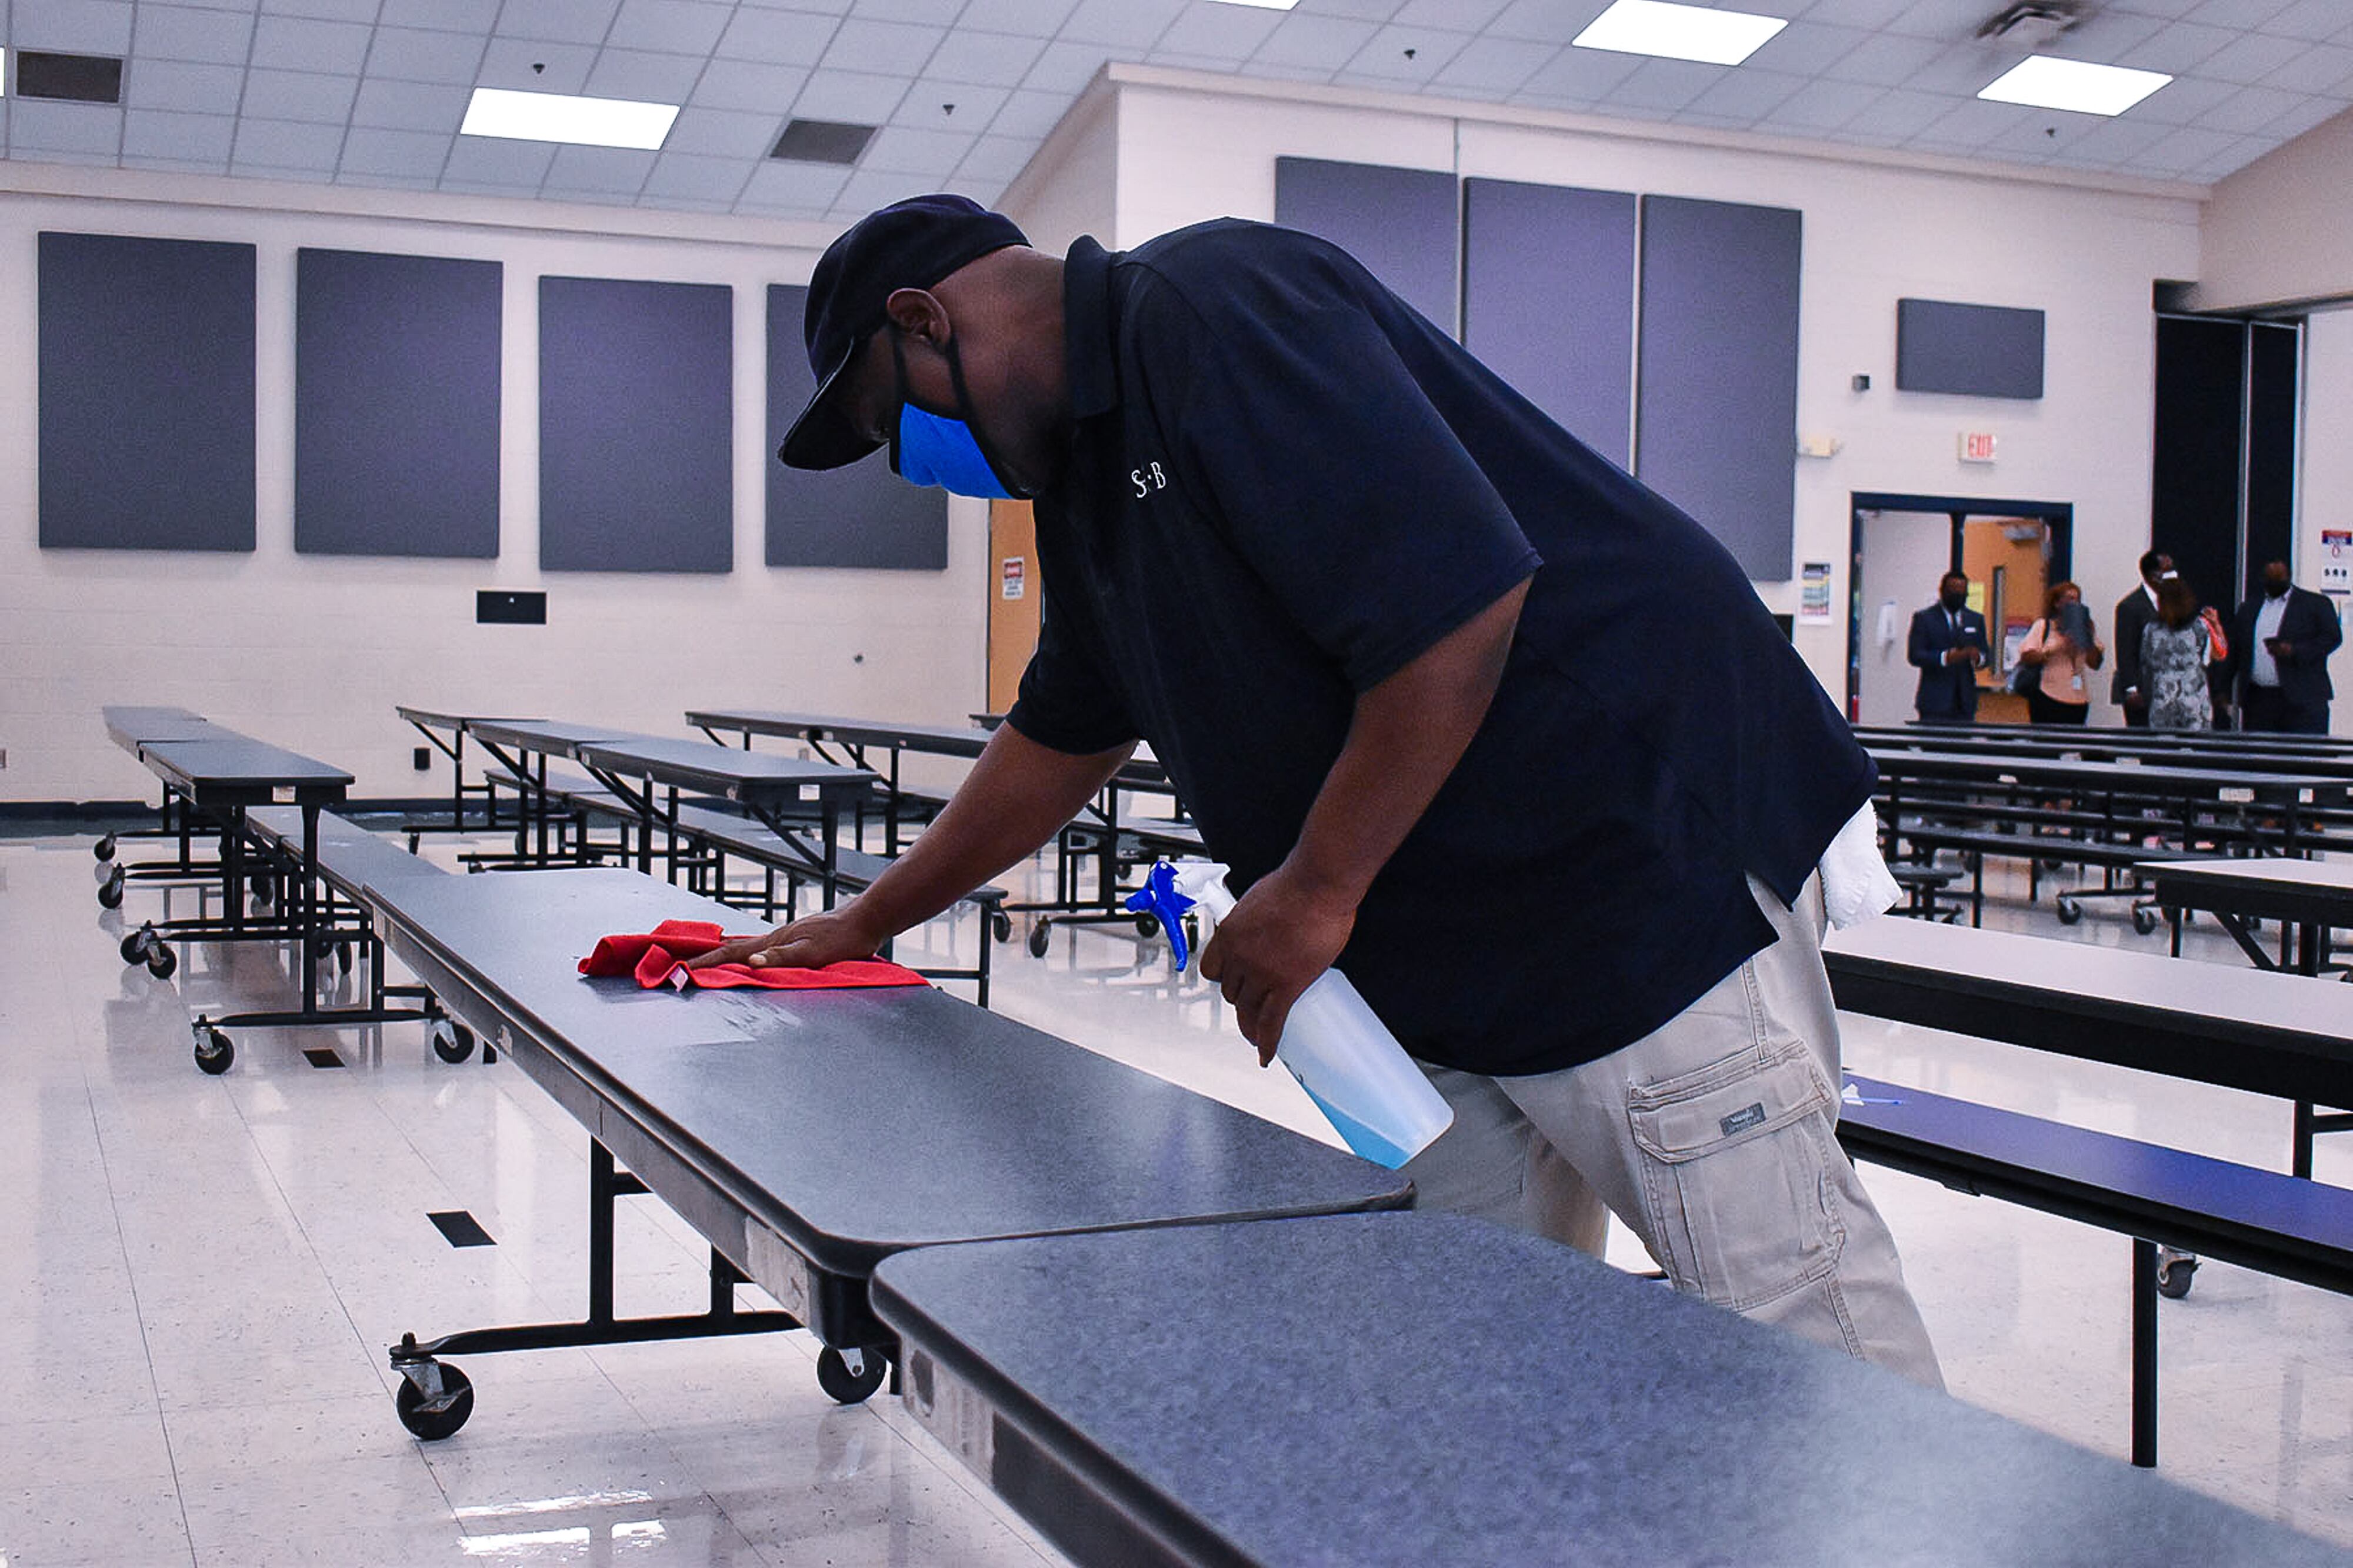 A Shelby County Schools employee sanitizes one of many long cafeteria tables while a group of people stand toward the back of the room.